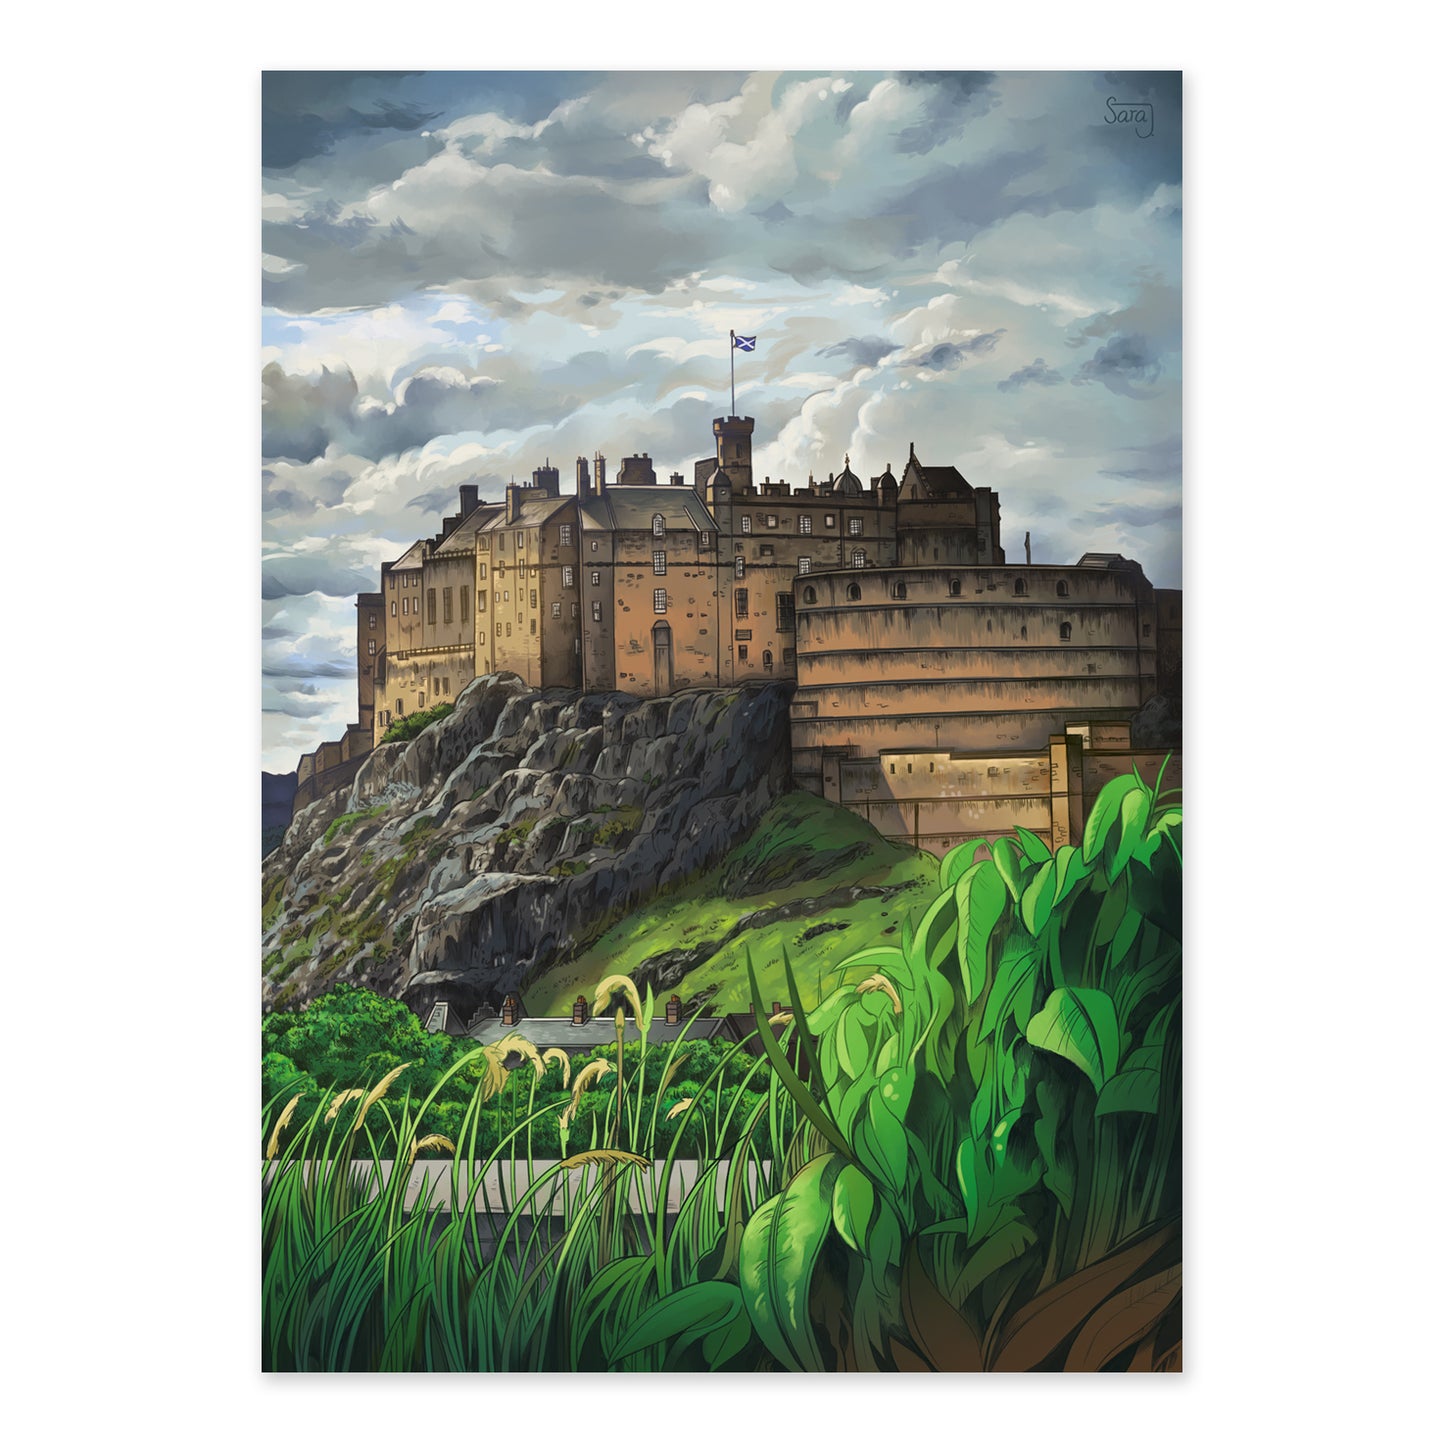 Art Print of Edinburgh Castle from South East point of view.